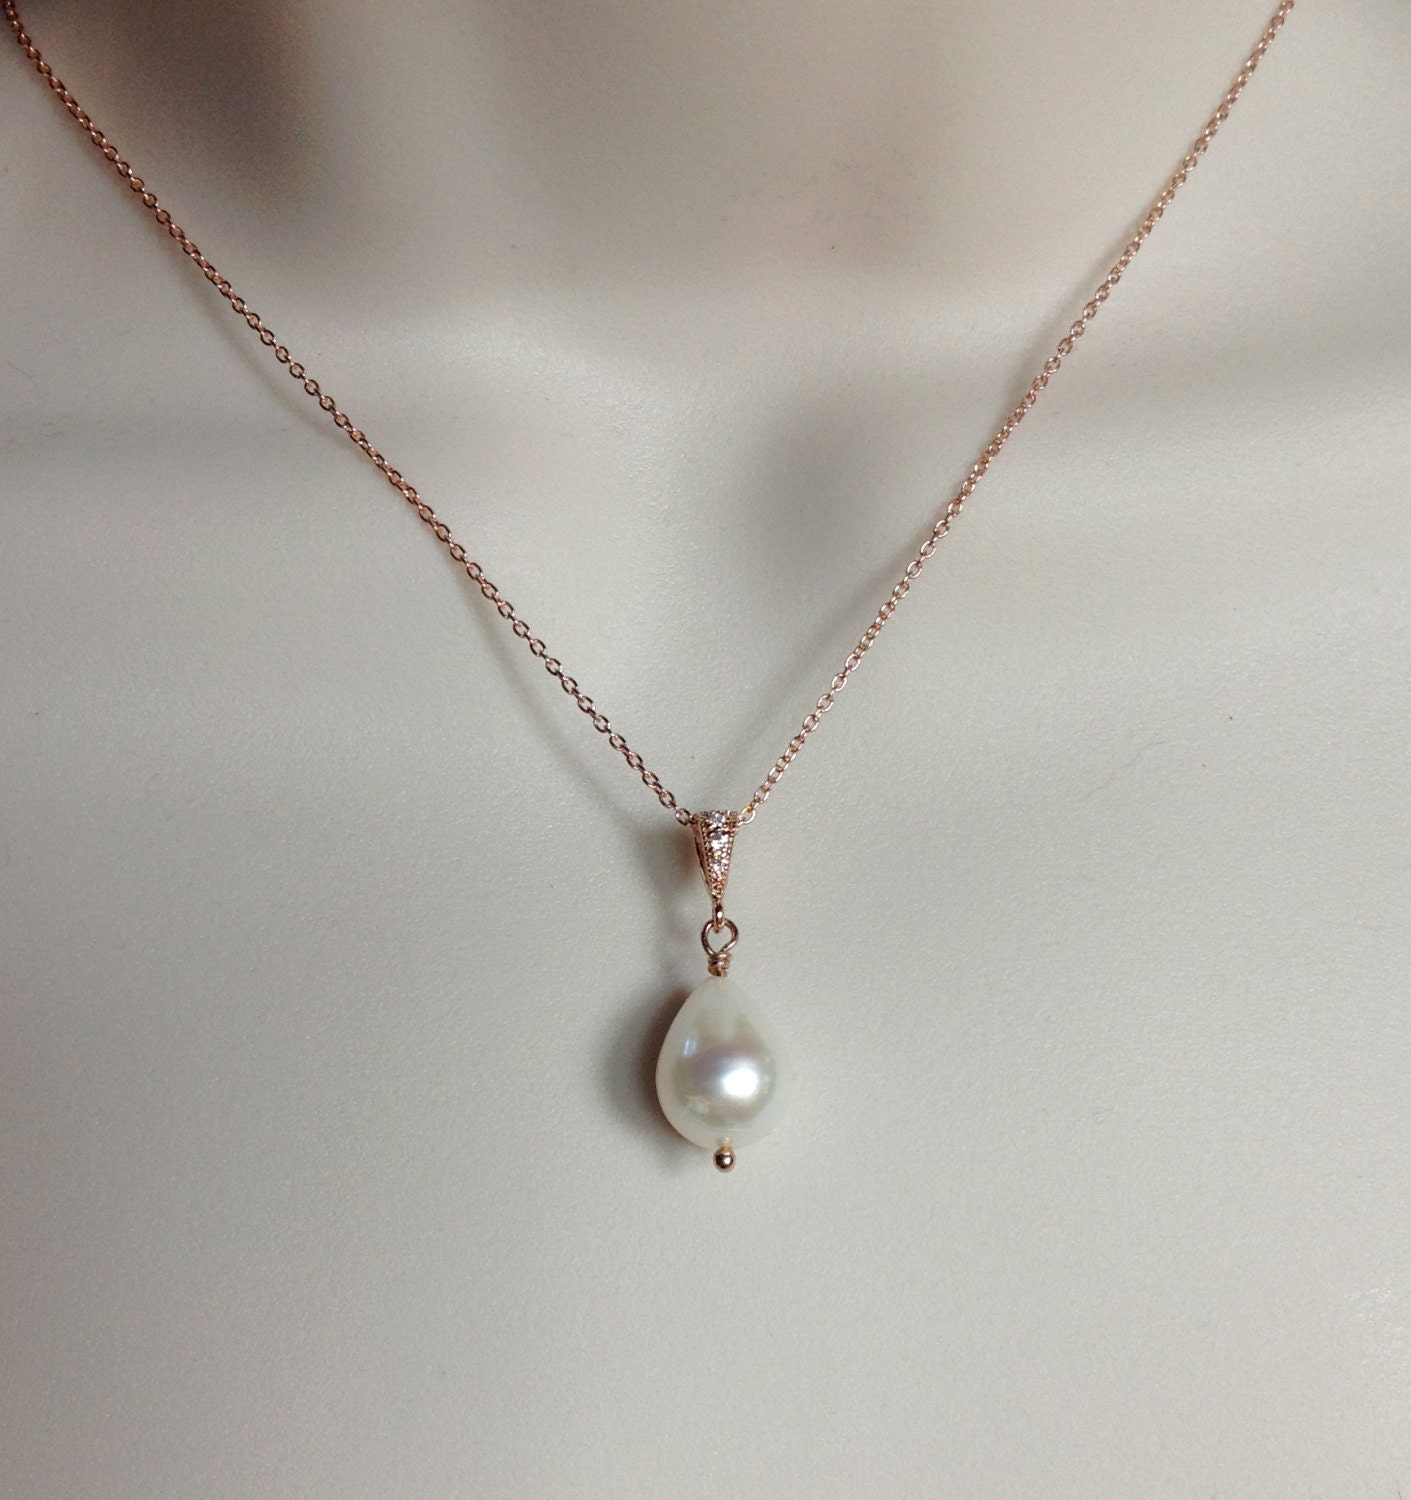 Rose Gold Teardrop Pear Shaped Pearl Necklace Bridesmaid | Etsy